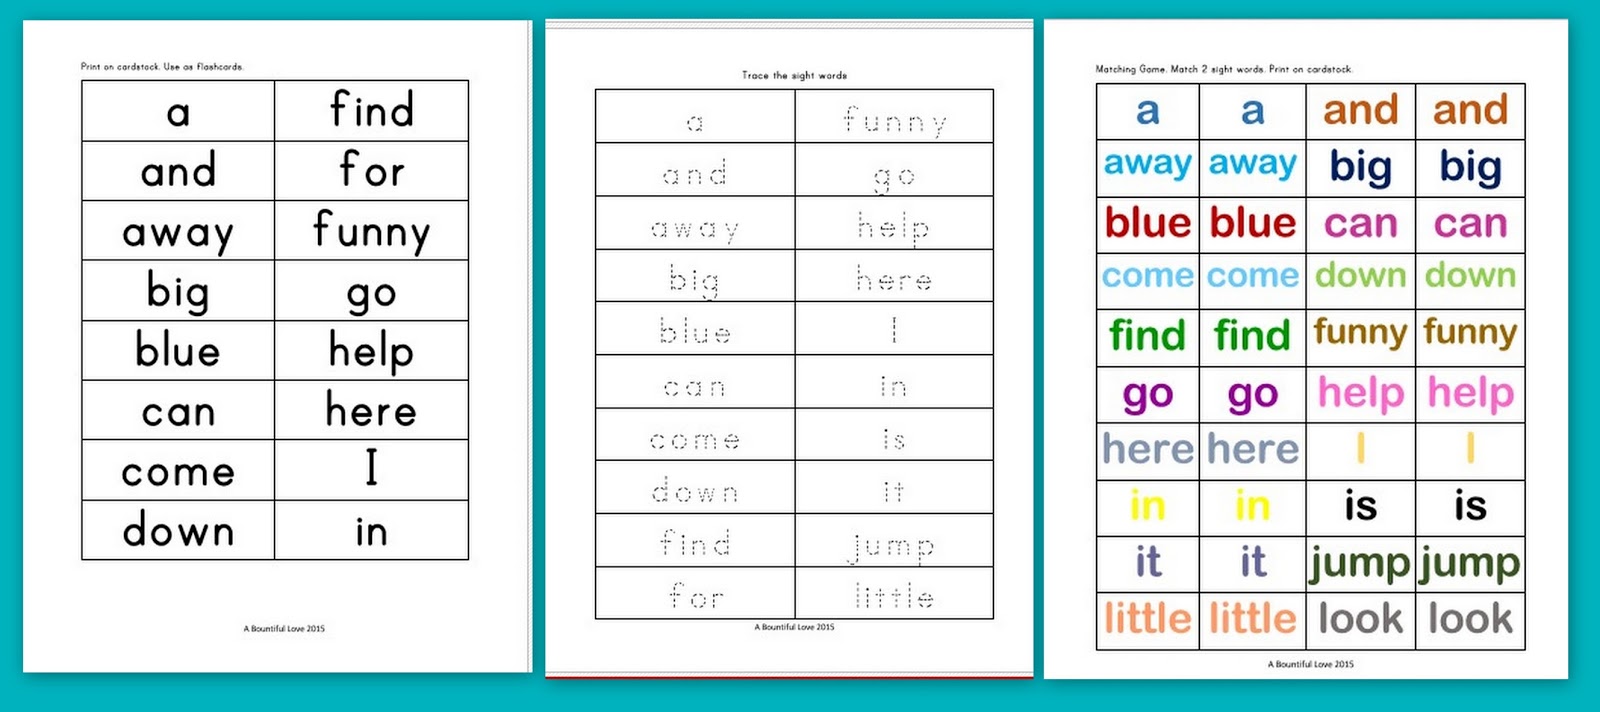 40 Dolch Sight Words for Pre-Kindergarten - A Bountiful Love